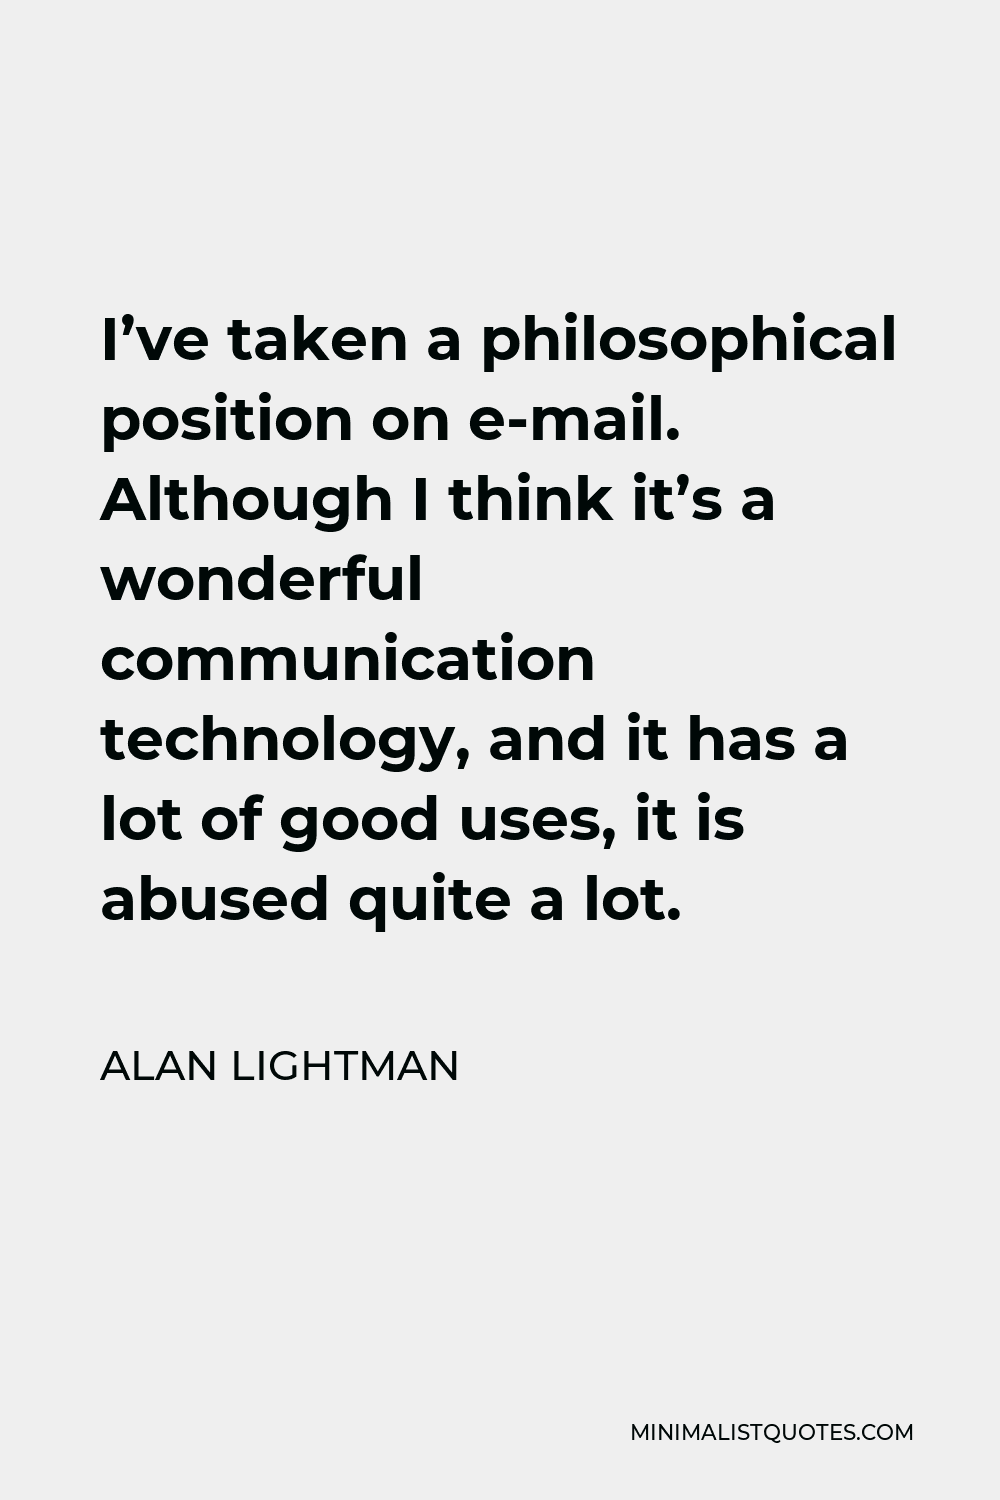 Alan Lightman Quote - I’ve taken a philosophical position on e-mail. Although I think it’s a wonderful communication technology, and it has a lot of good uses, it is abused quite a lot.